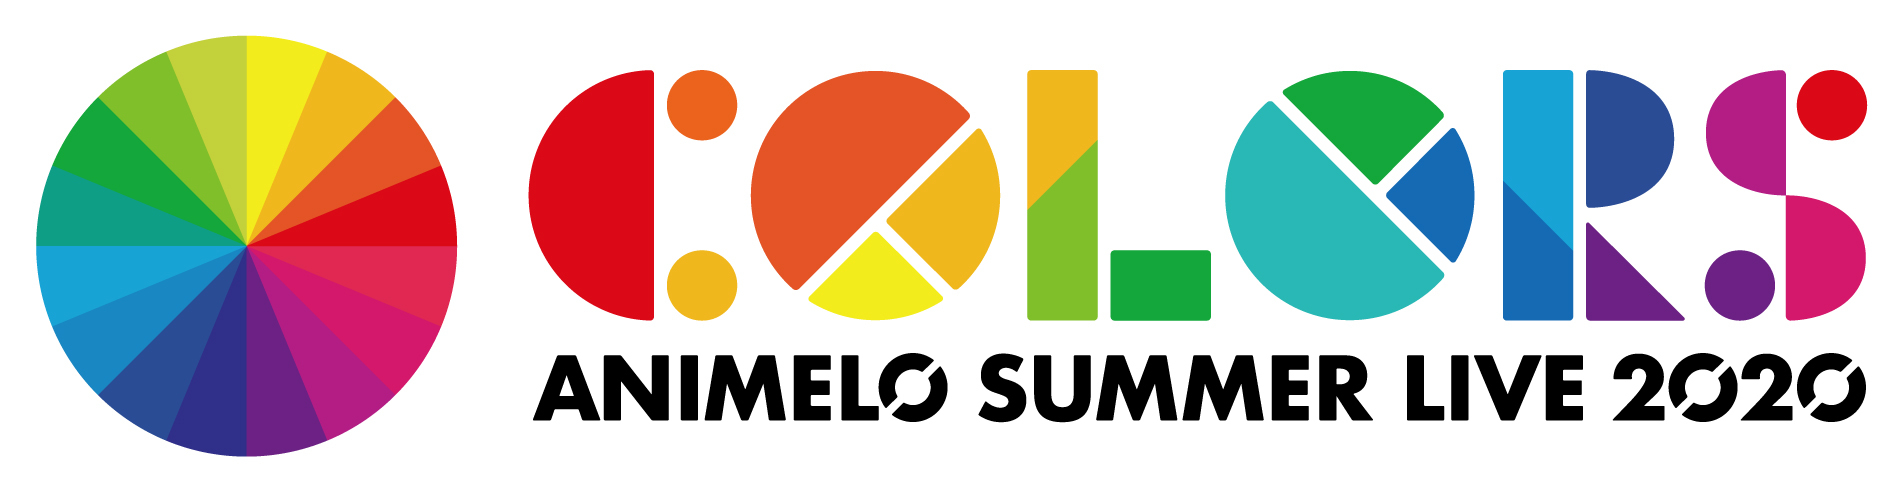 『Animelo Summer Live 2020 –COLORS-』ロゴ